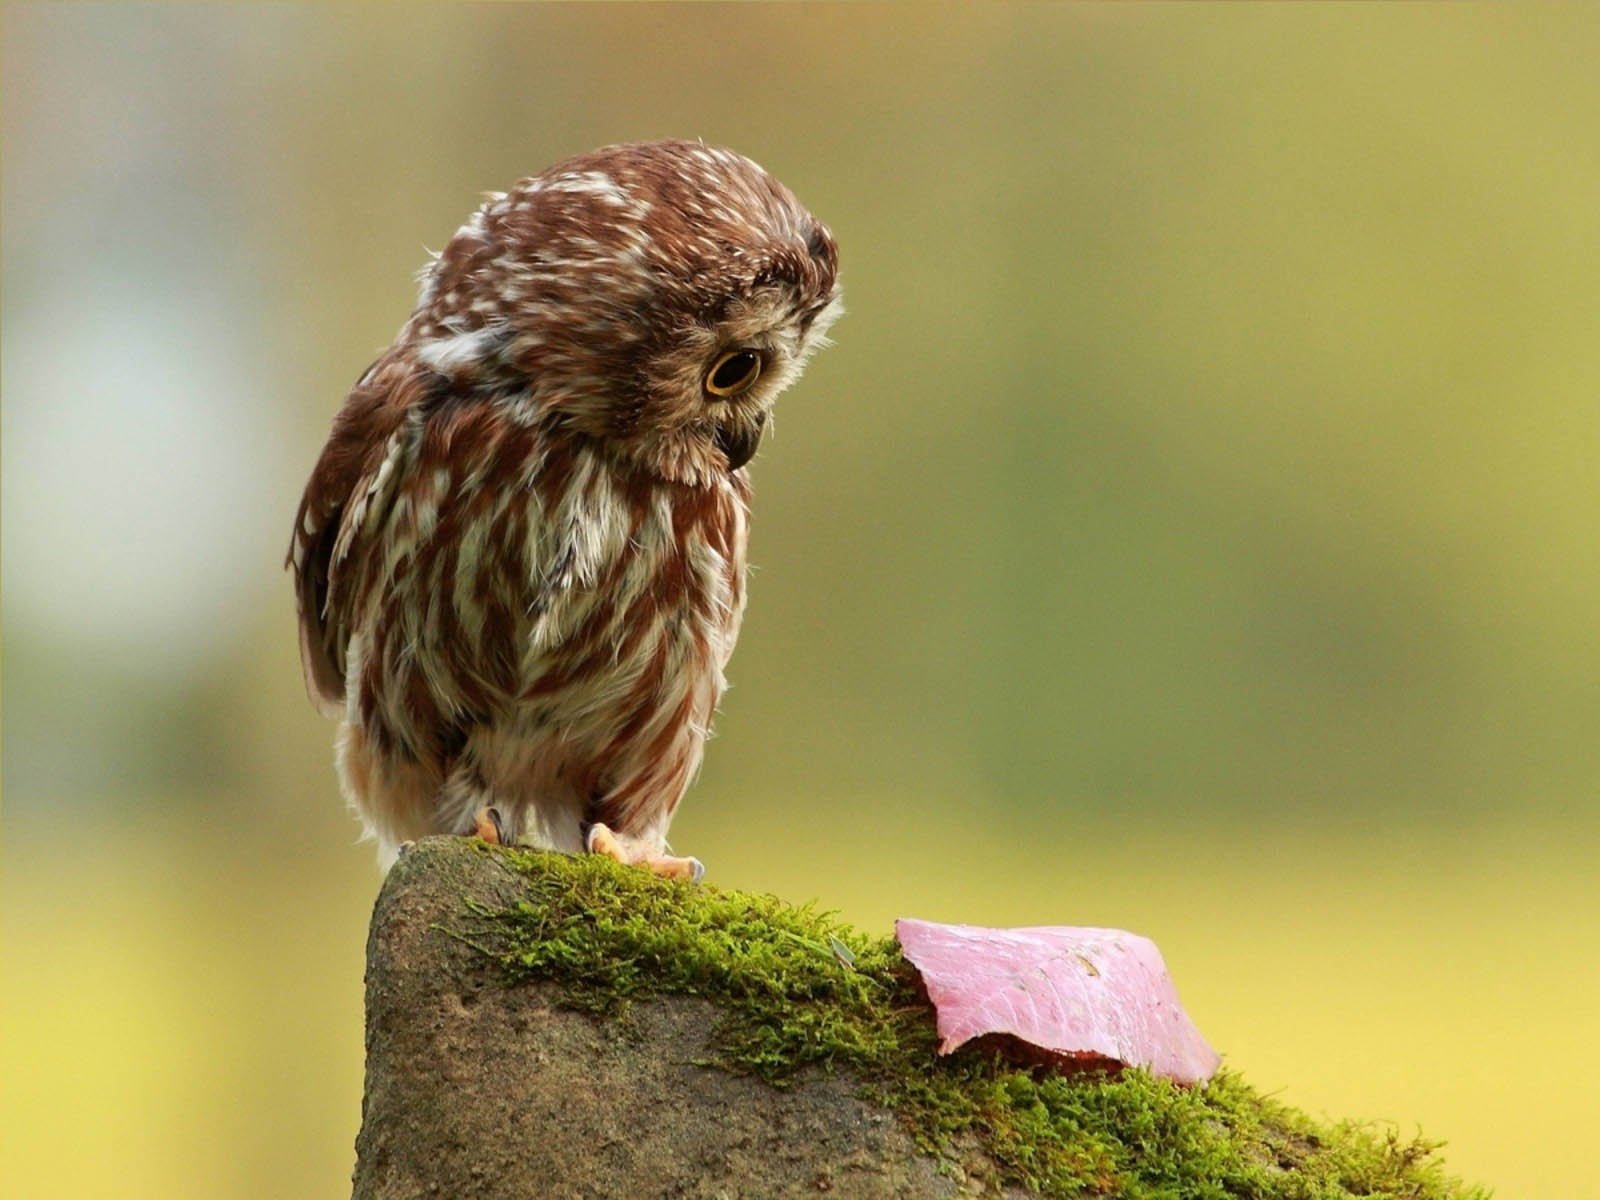  download Funny Owl Wallpapers Images Paos Pictures and 1600x1200